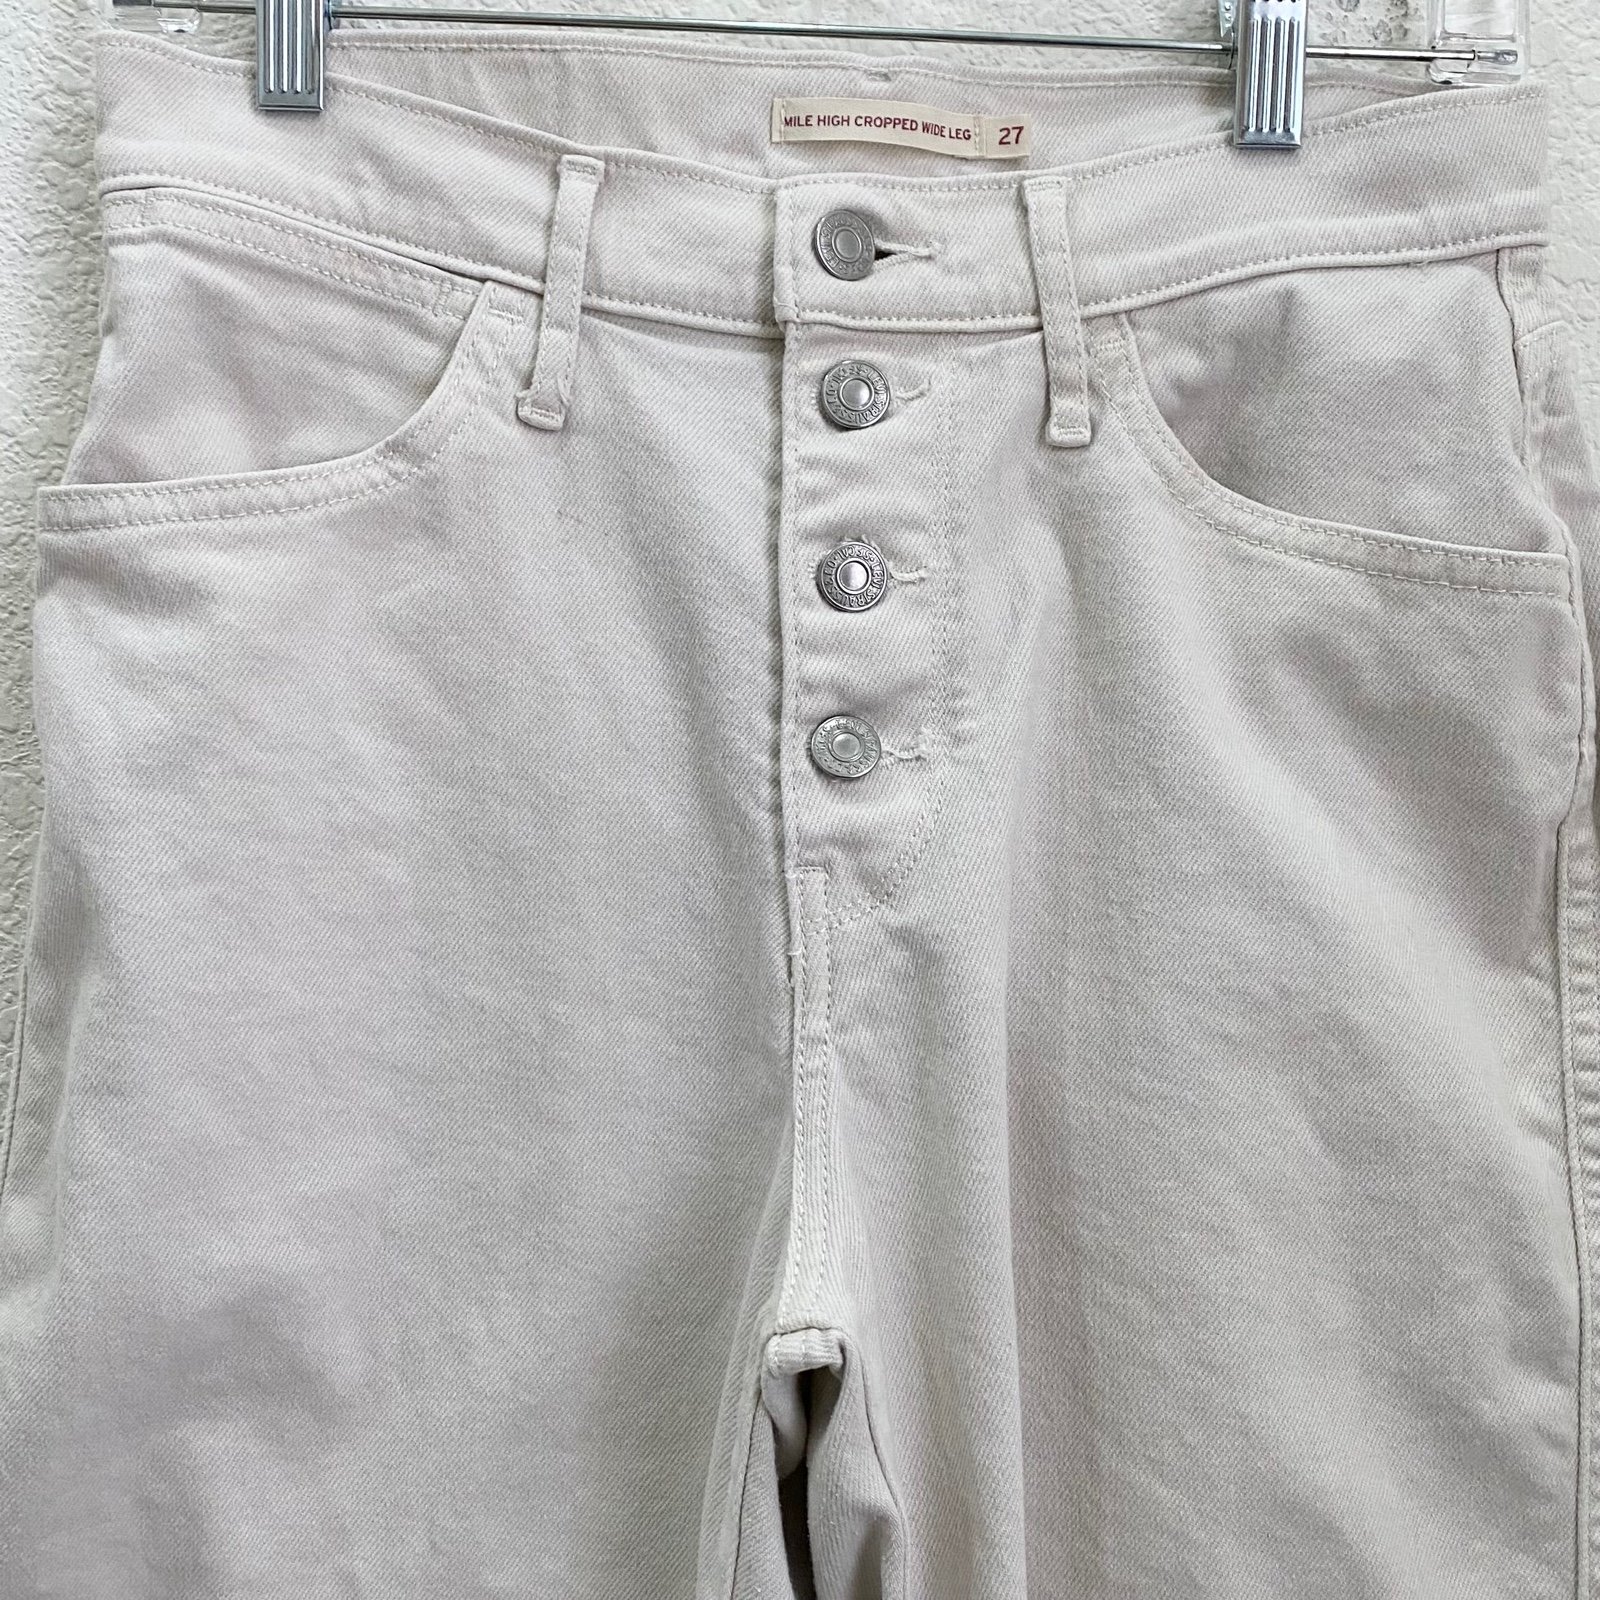 Classic LEVI’S Ivory Beige Mile High Cropped Wide Leg Jeans Size 27 PQACC5haL online store